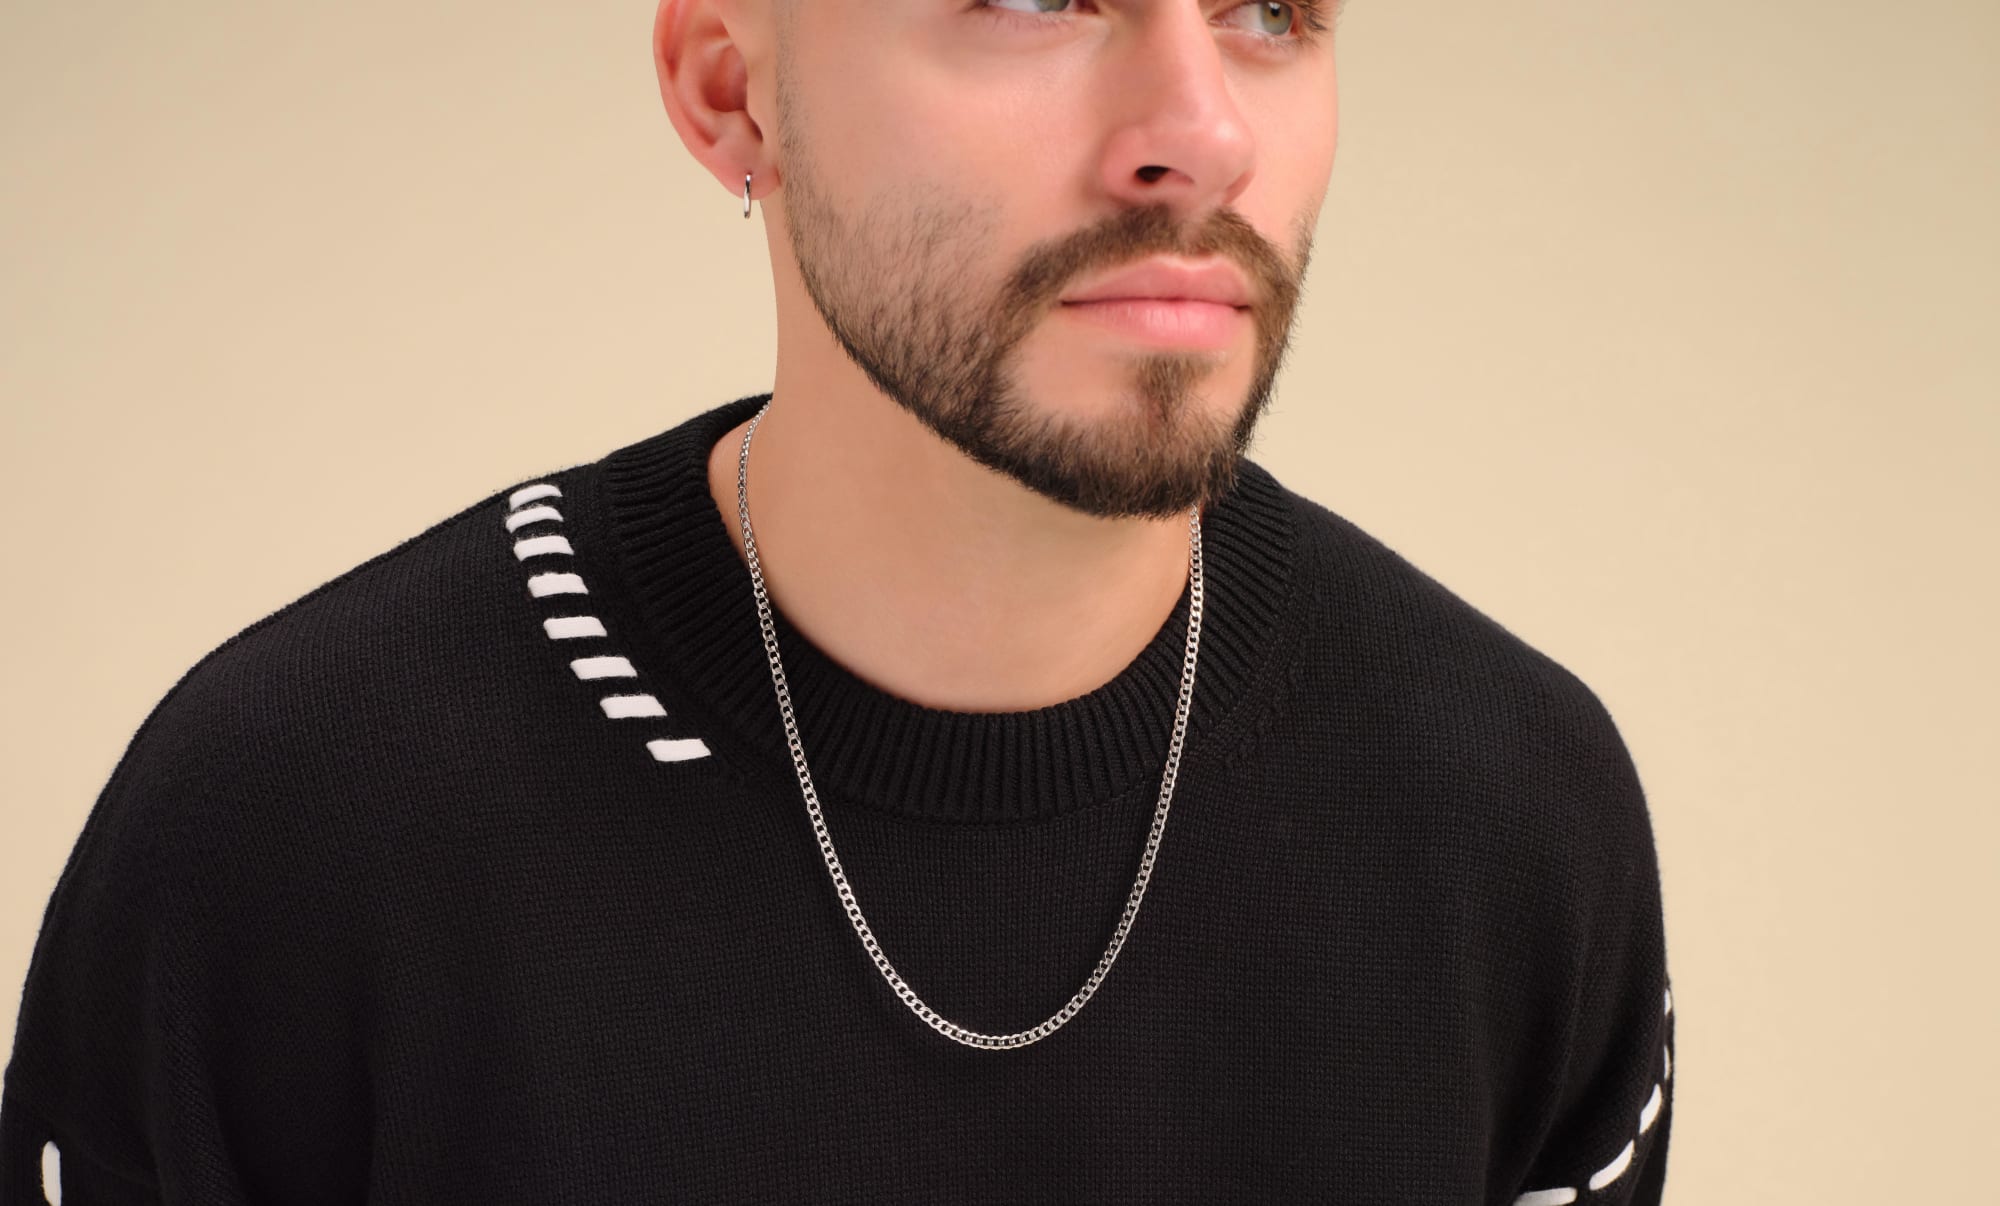 A male model wearing the JAXXON 3mm Silver Curb Chain styled with a black crewneck sweater with white stitch detailing.